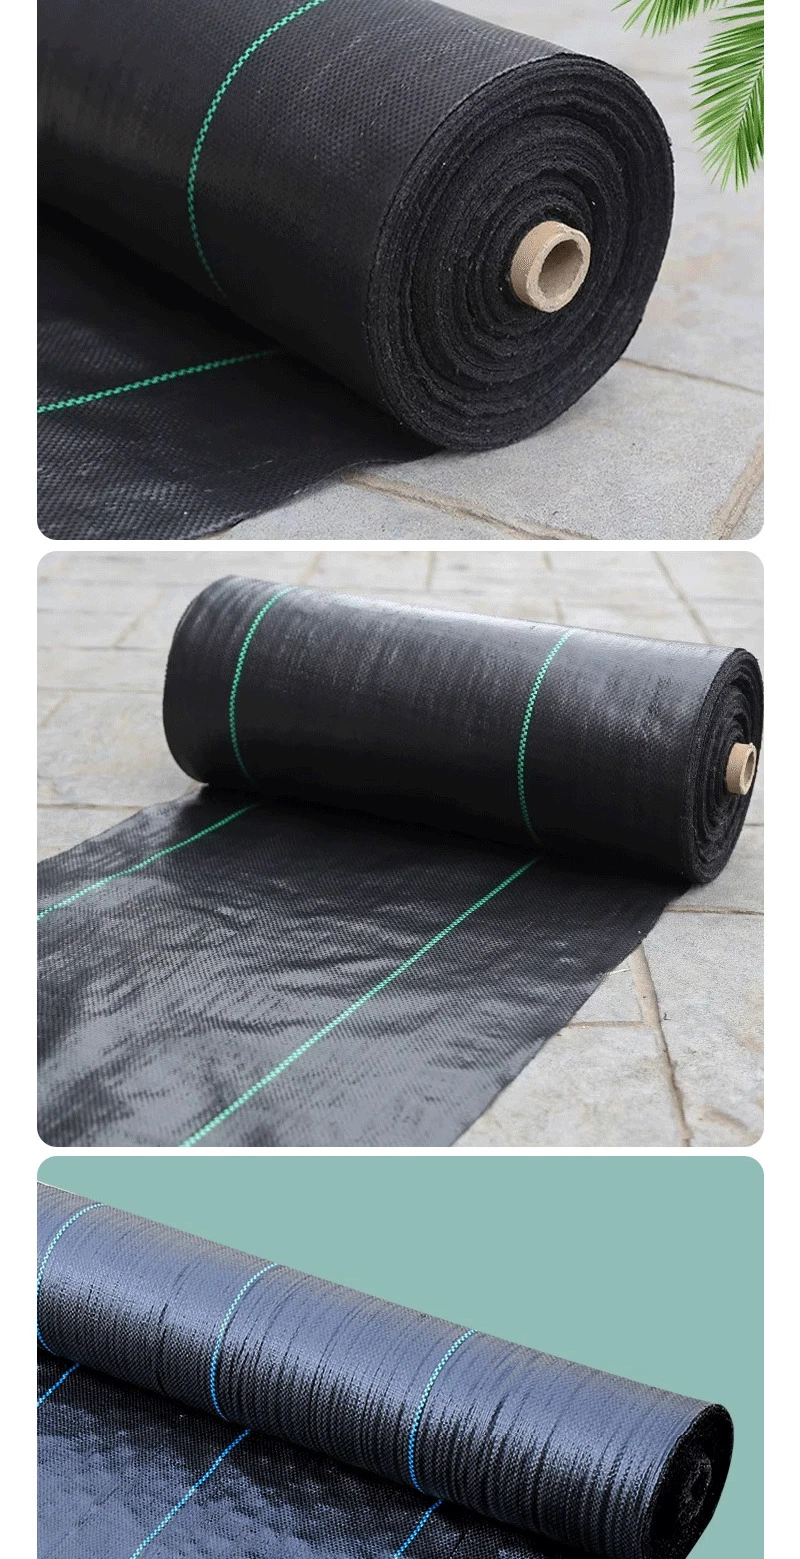 Woven Fabric Geotextile Weed Control Ground Cover Silt Fence Stabilization PP Woven Geotextile for Soil Reinforcement Anti Grass